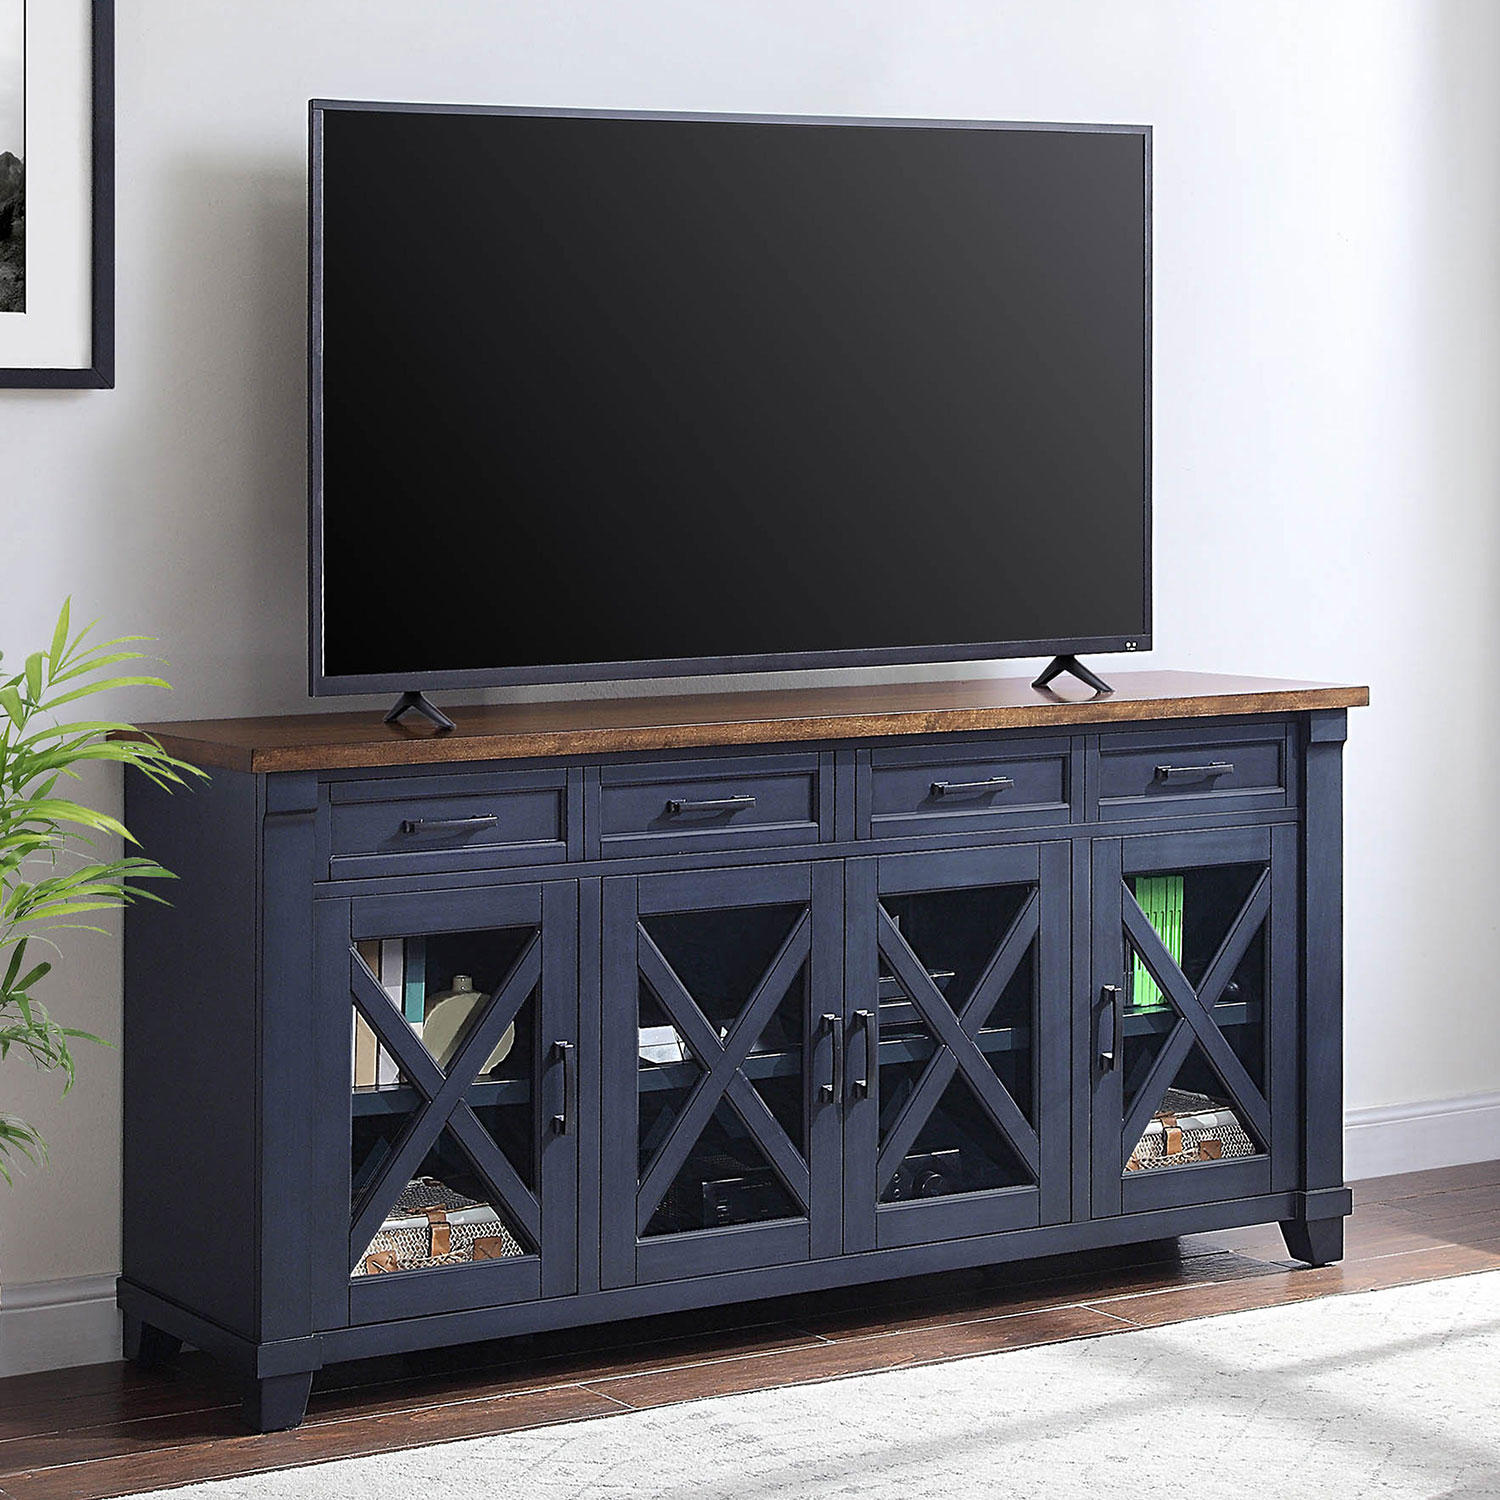 Member’s Mark Livingston TV Console for Up to 82″ TVs